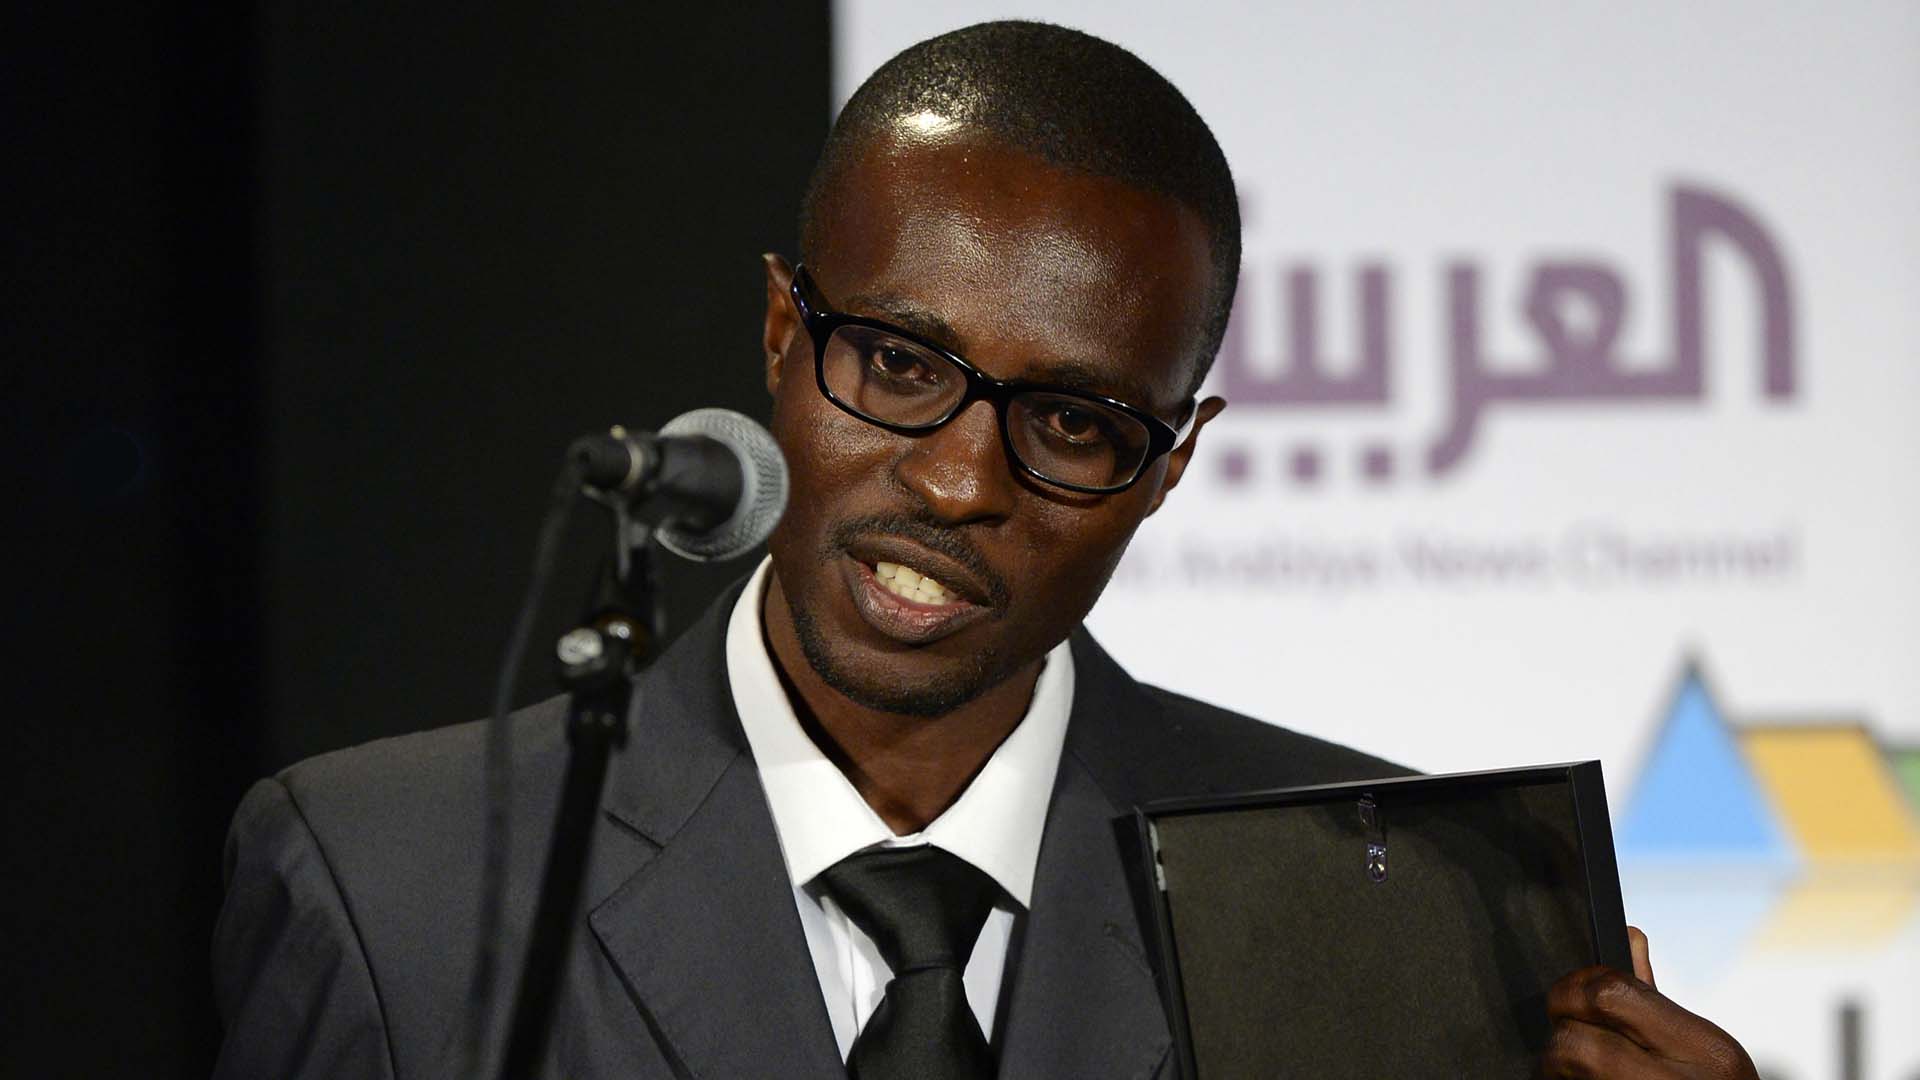 Maurice won the Young Journalist FPA award in 2014